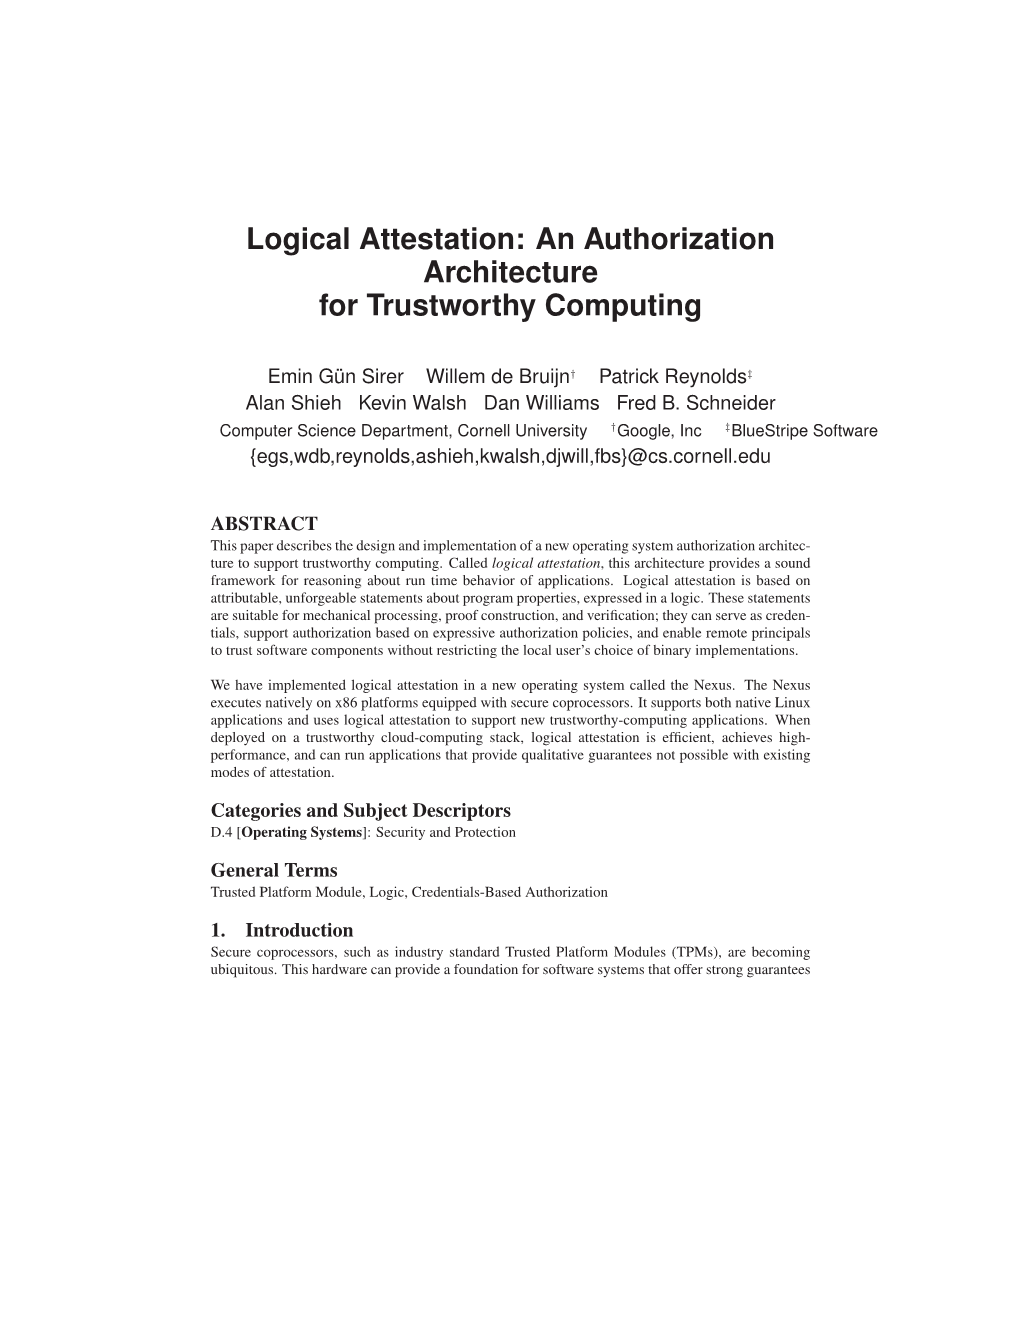 Logical Attestation: an Authorization Architecture for Trustworthy Computing